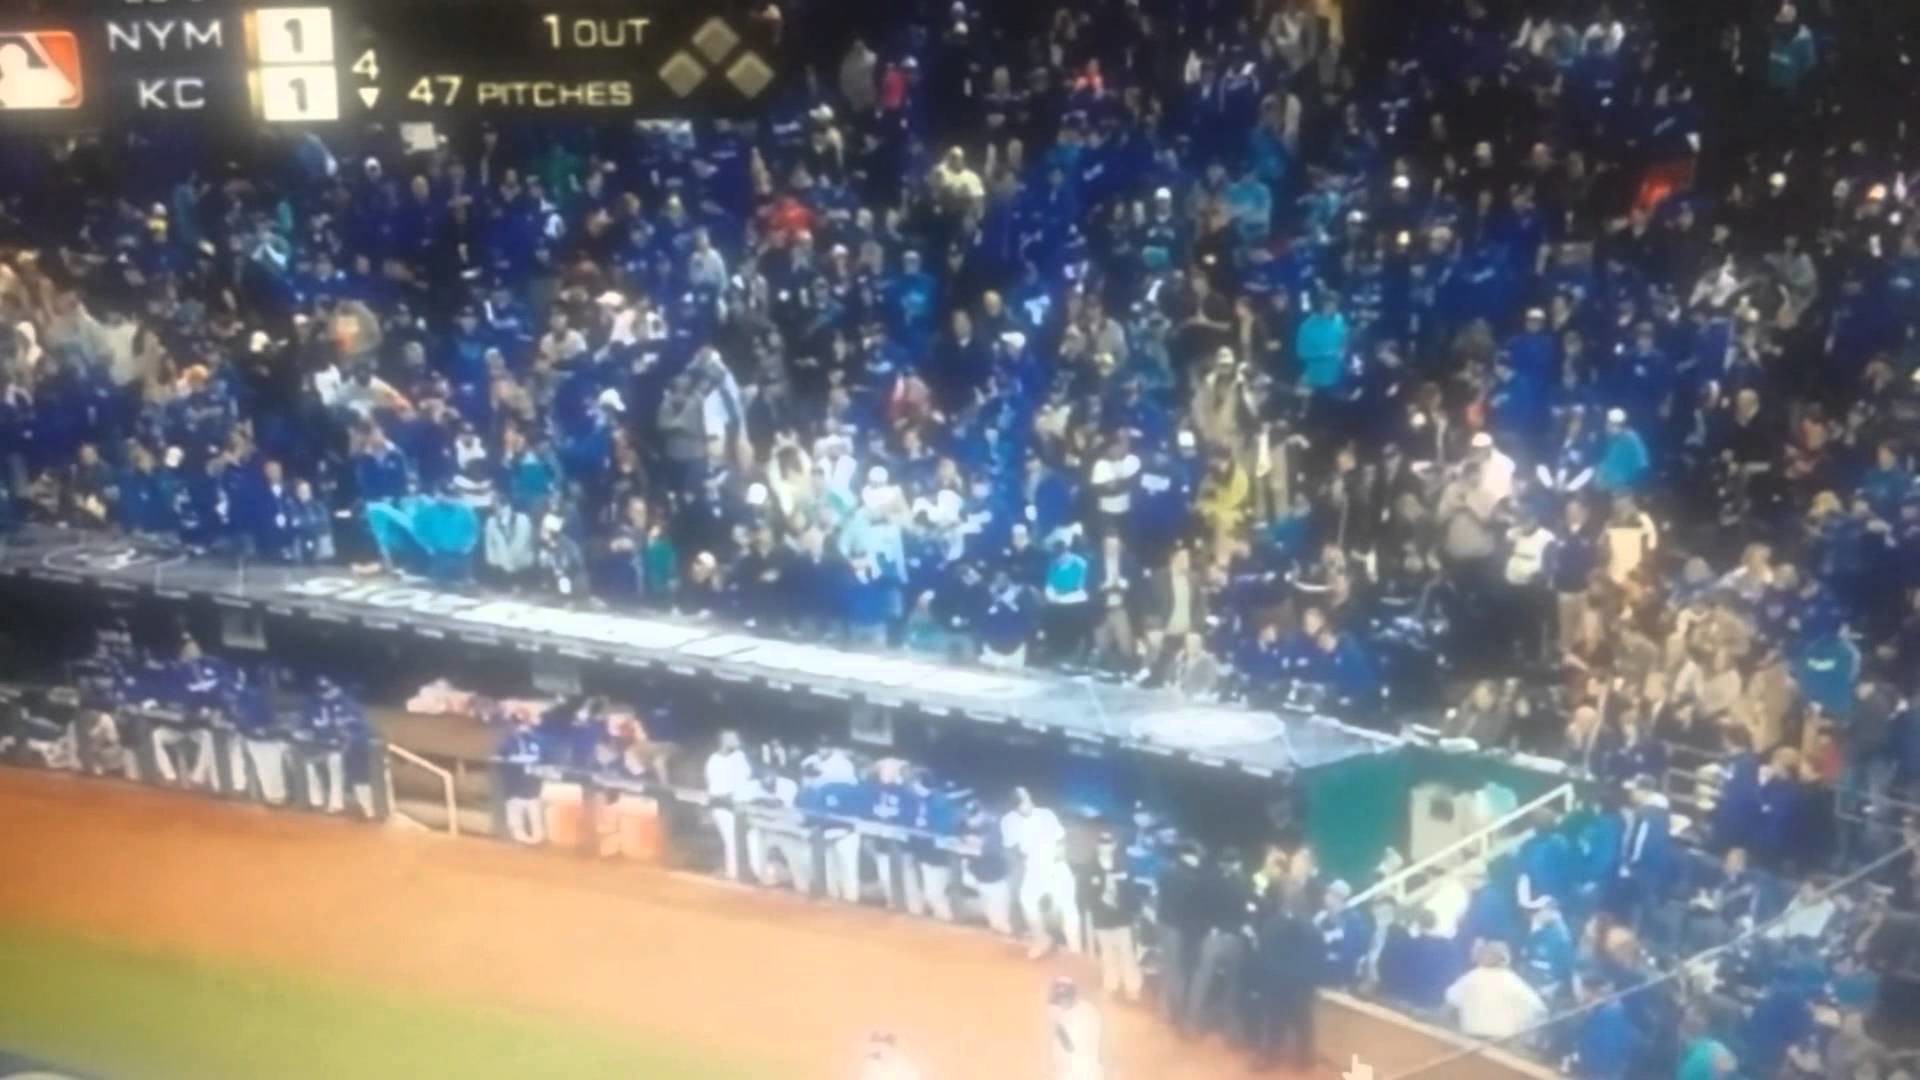 1920x1080 WORLD SERIES TECHNICAL DIFFICULTIES DELAY GAME METS ROYALS